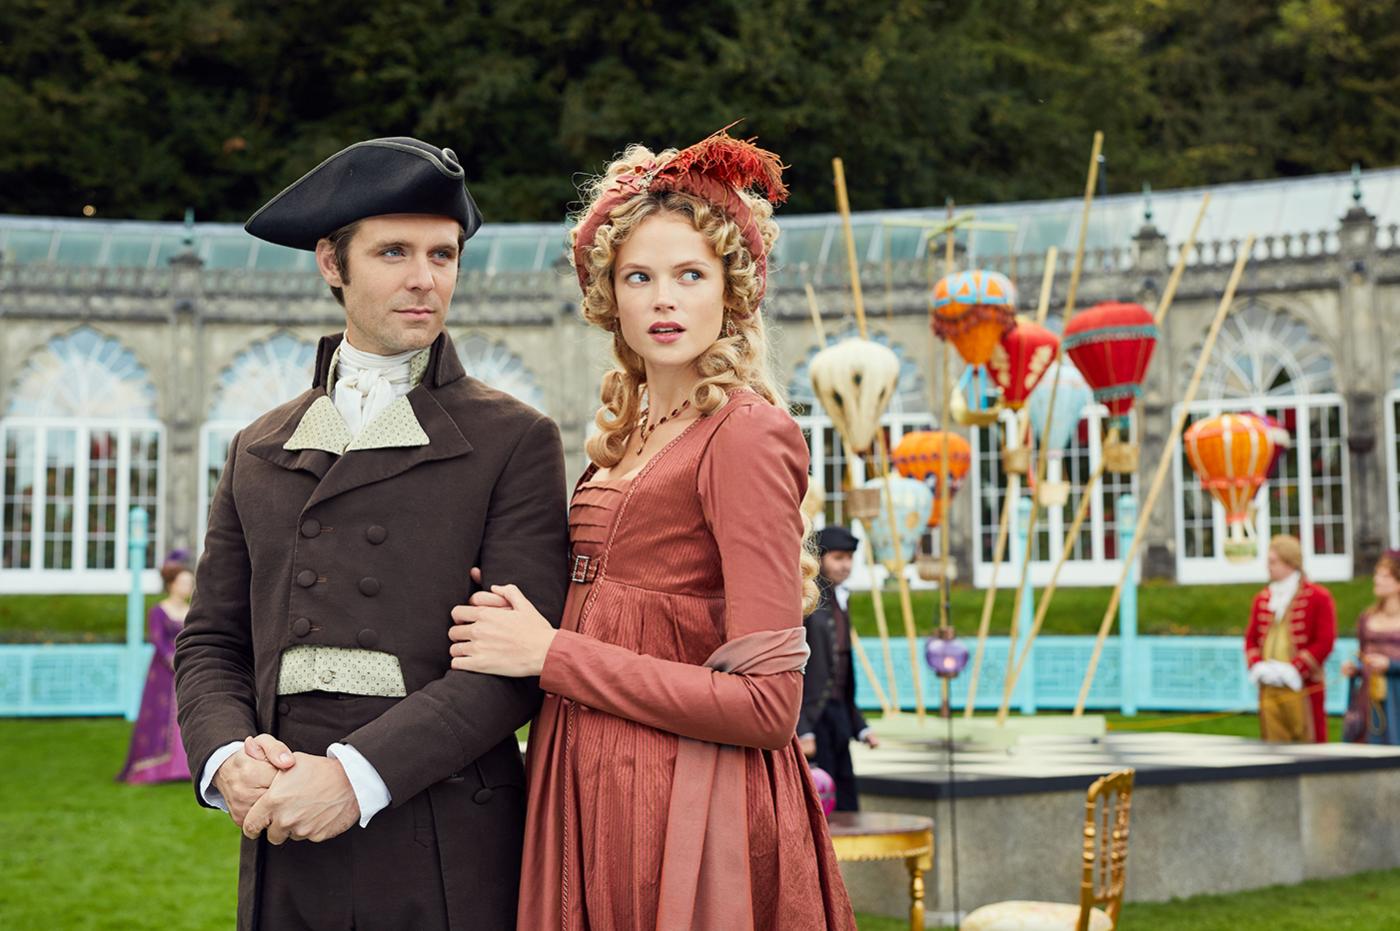 Luke Norris as Dr. Dwight Enys and Garbriella Wilde as Caroline Enys in Poldark. Photo: Mammoth Screen for MASTERPIECE